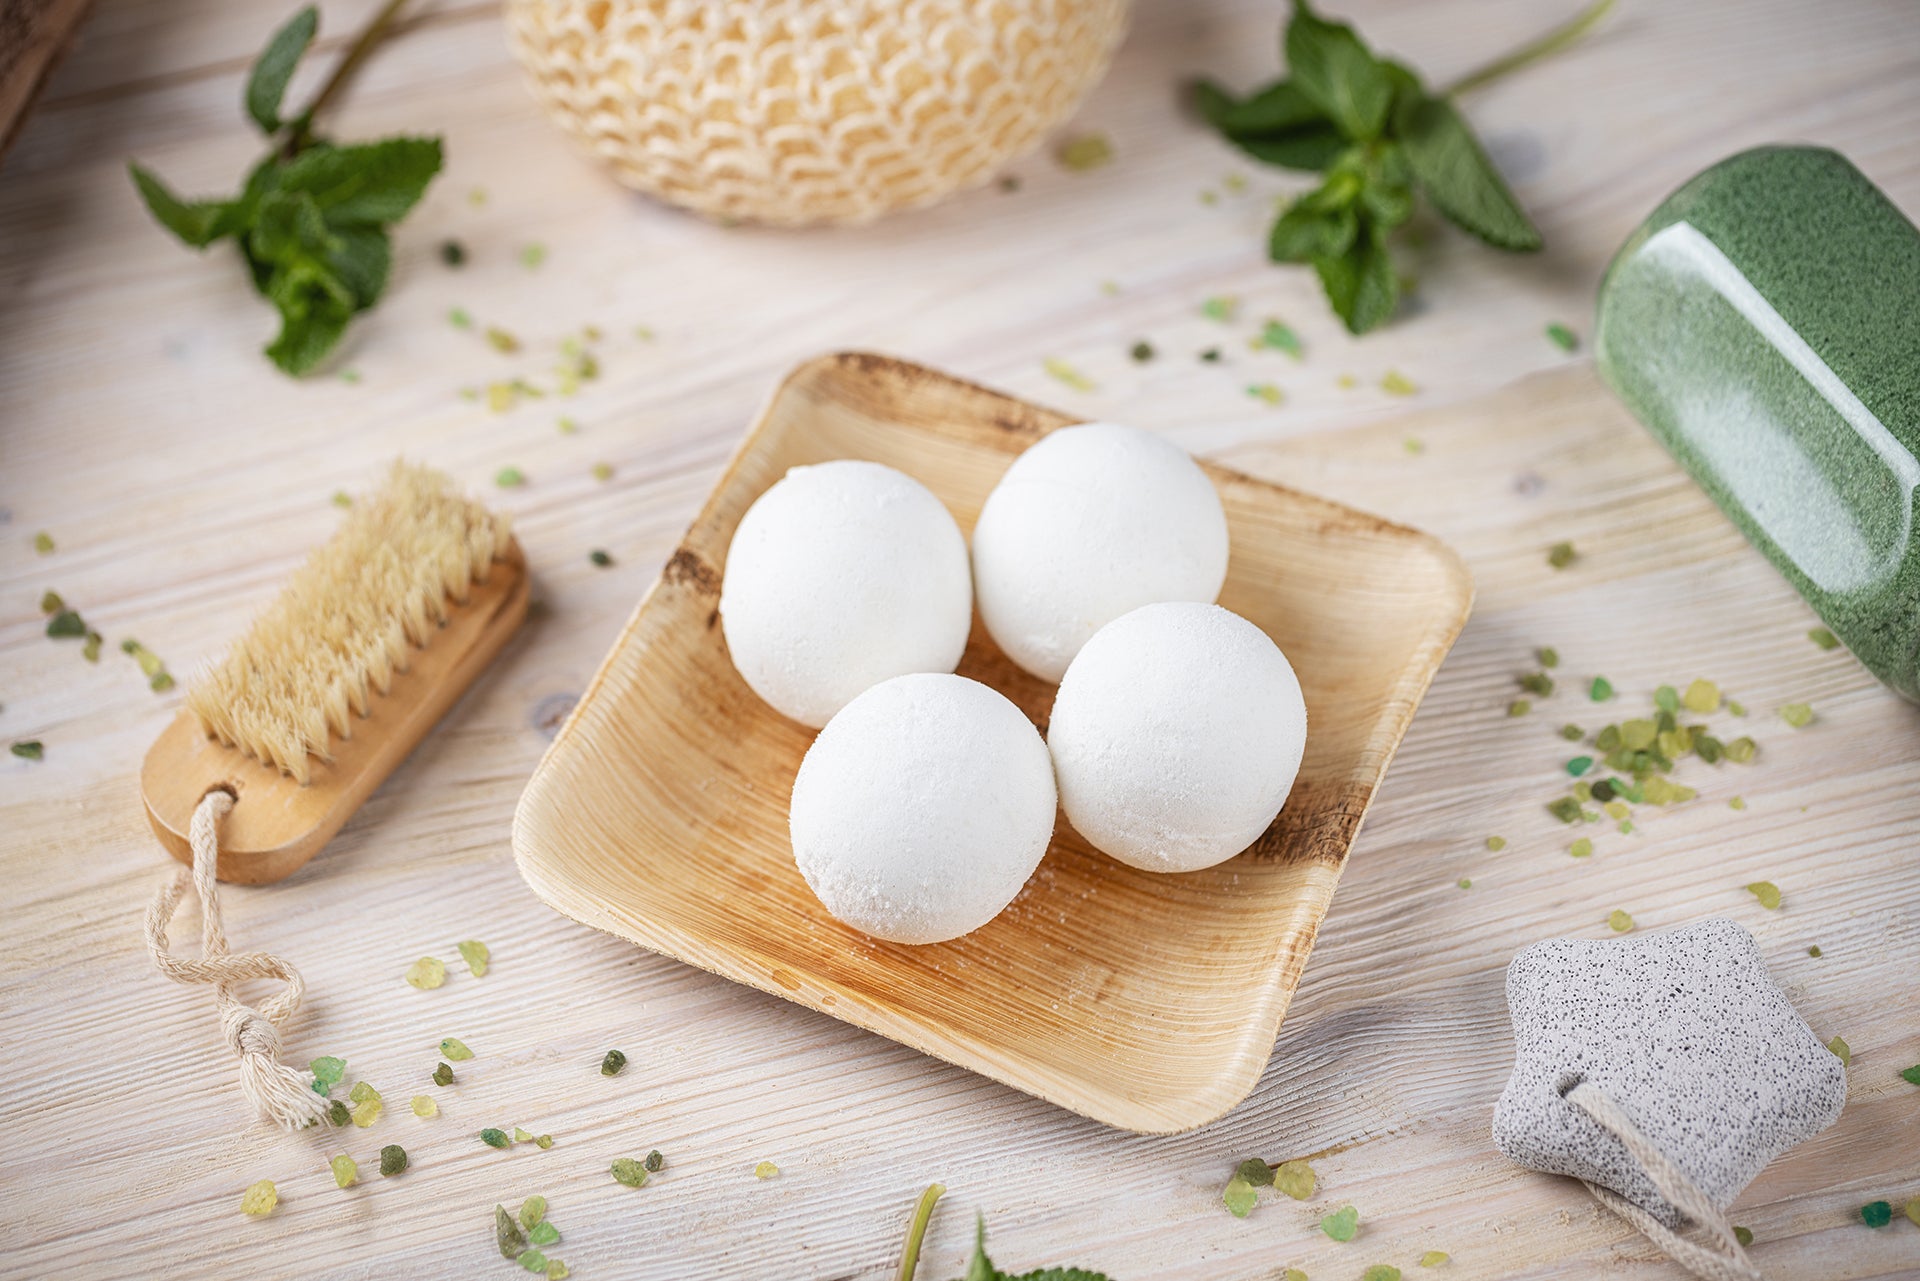 Check out the 10 Best CBD Bath Bombs!